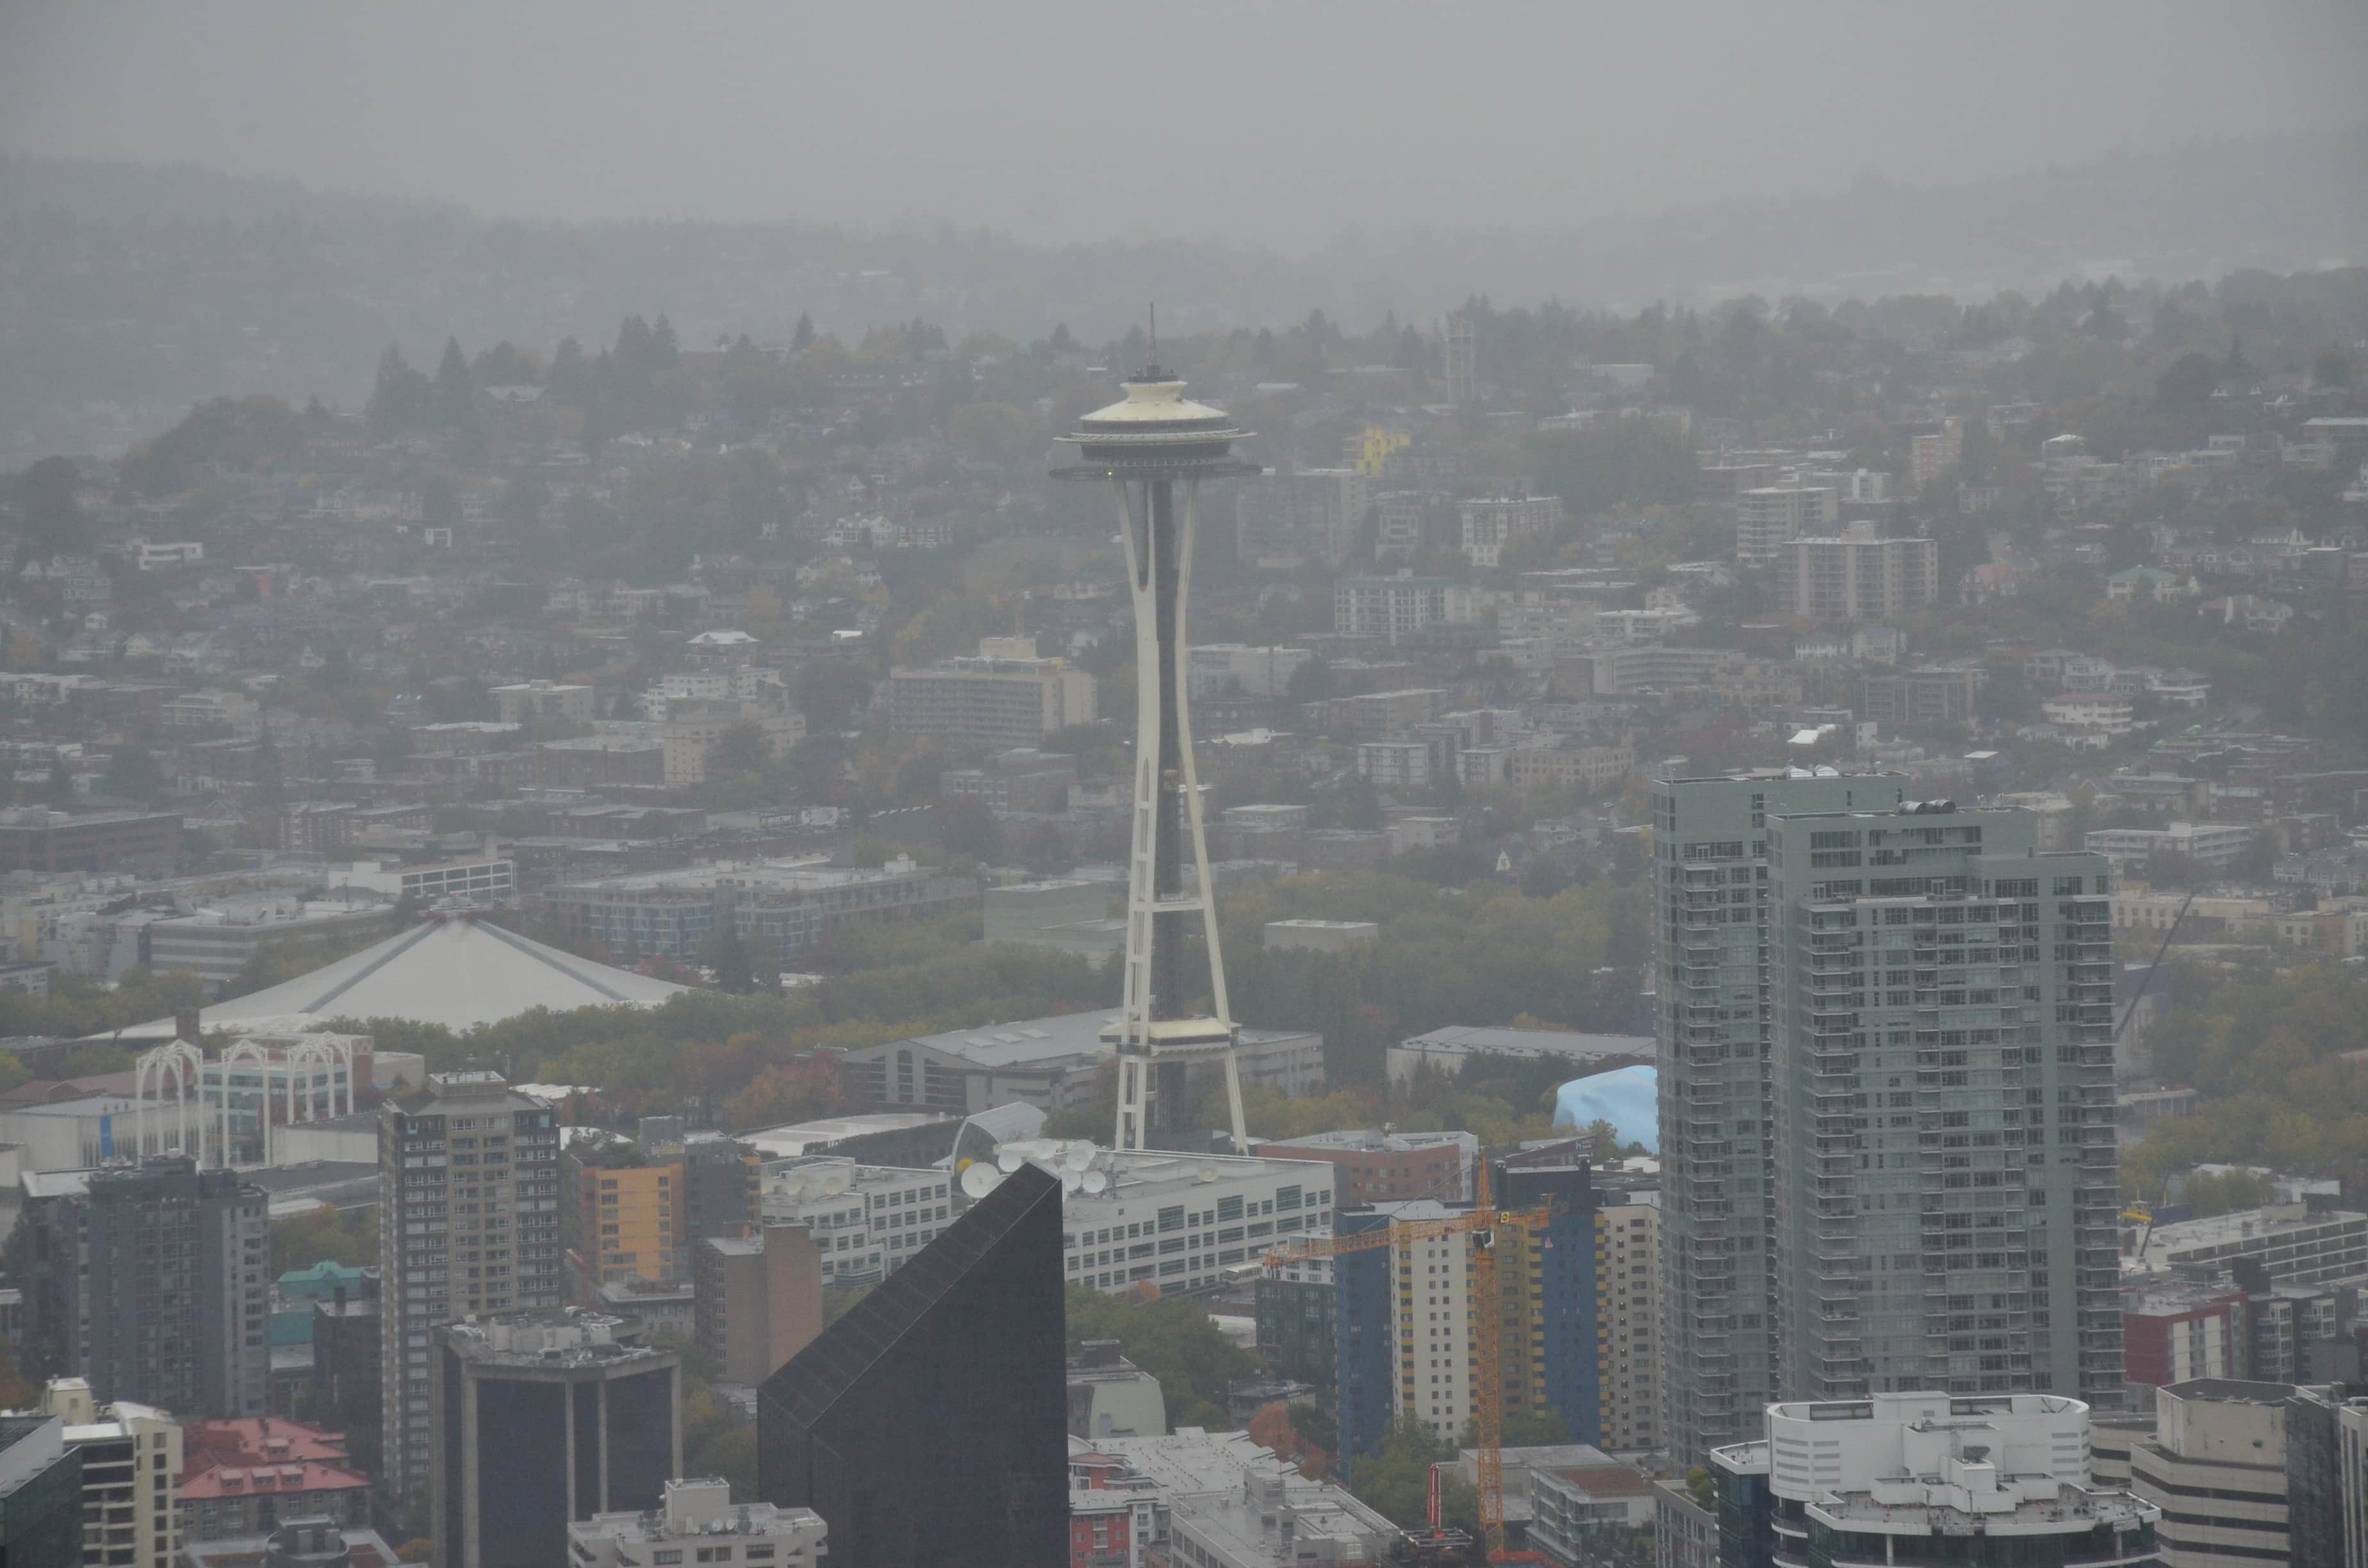 Space Needle from Columbia Center in Seattle, Washington